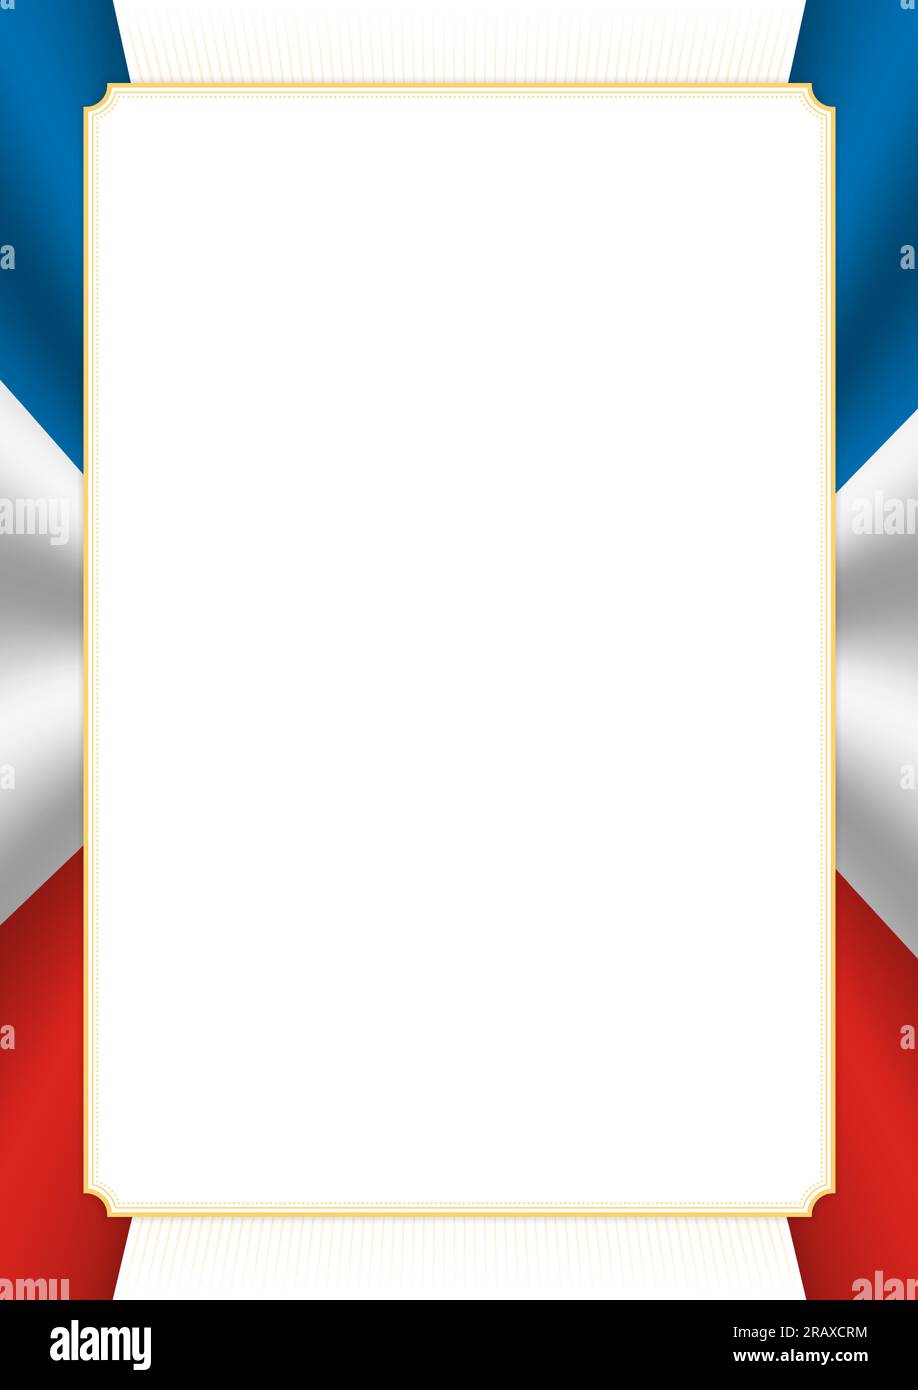 Vertical frame and border with colors of Crimea flag, template elements ...